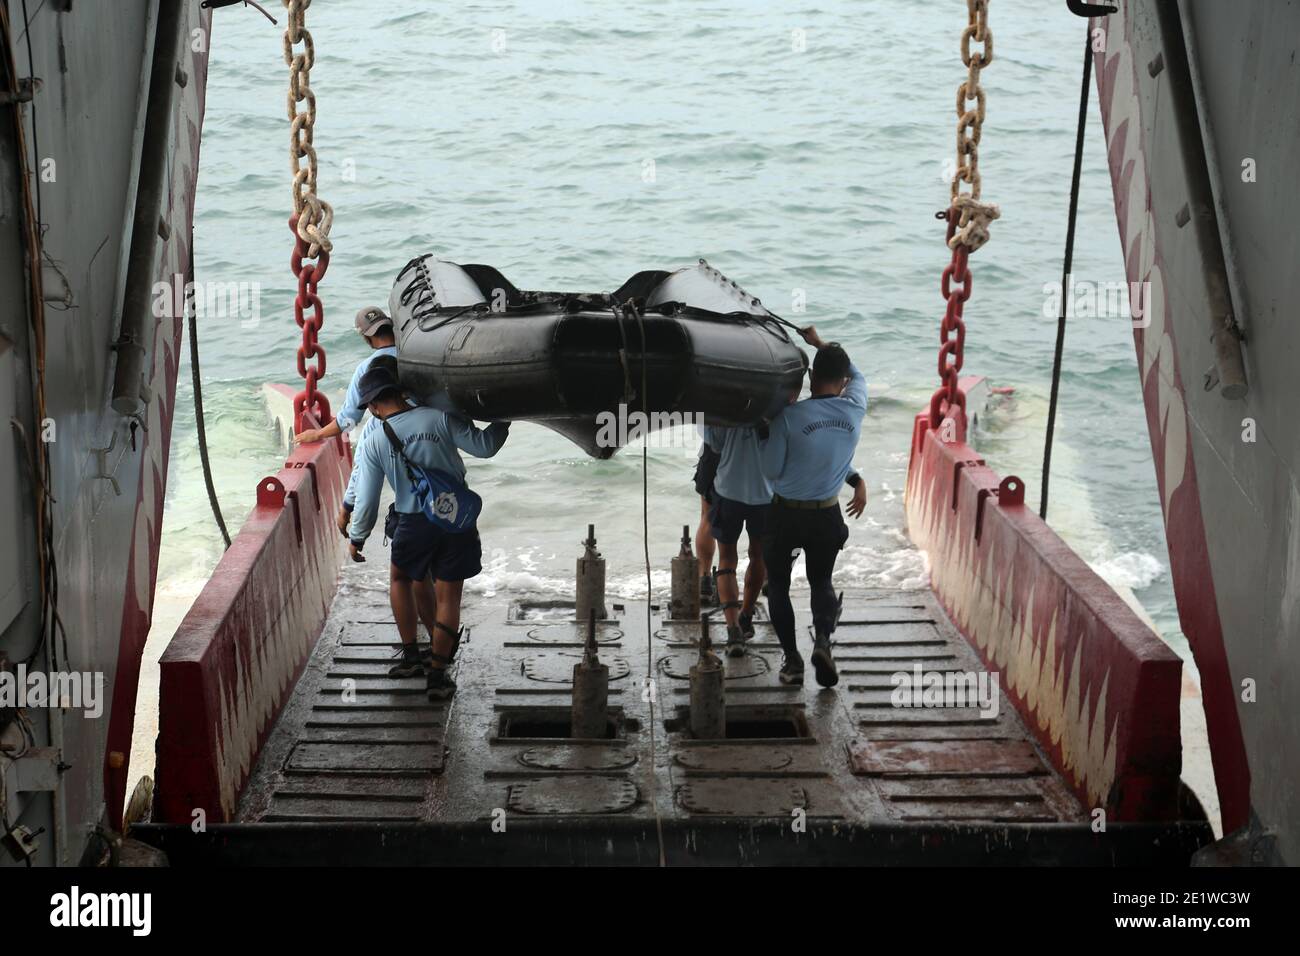 Indonesian Navy Divers carry their Rigid inflatable boat for rescue operation search Sriwijaya Airlane flight SJ 182 that lost contact after taking off, On KRI Gilimanuk Ship.  According to an airline spokesperson, contact to Sriwijaya Air flight SJ182 was lost on 09 January 2021 shortly after the aircraft took off from Jakarta International Airport while en route to Pontianak in West Kalimantan province. A search and rescue operation is under way. Stock Photo